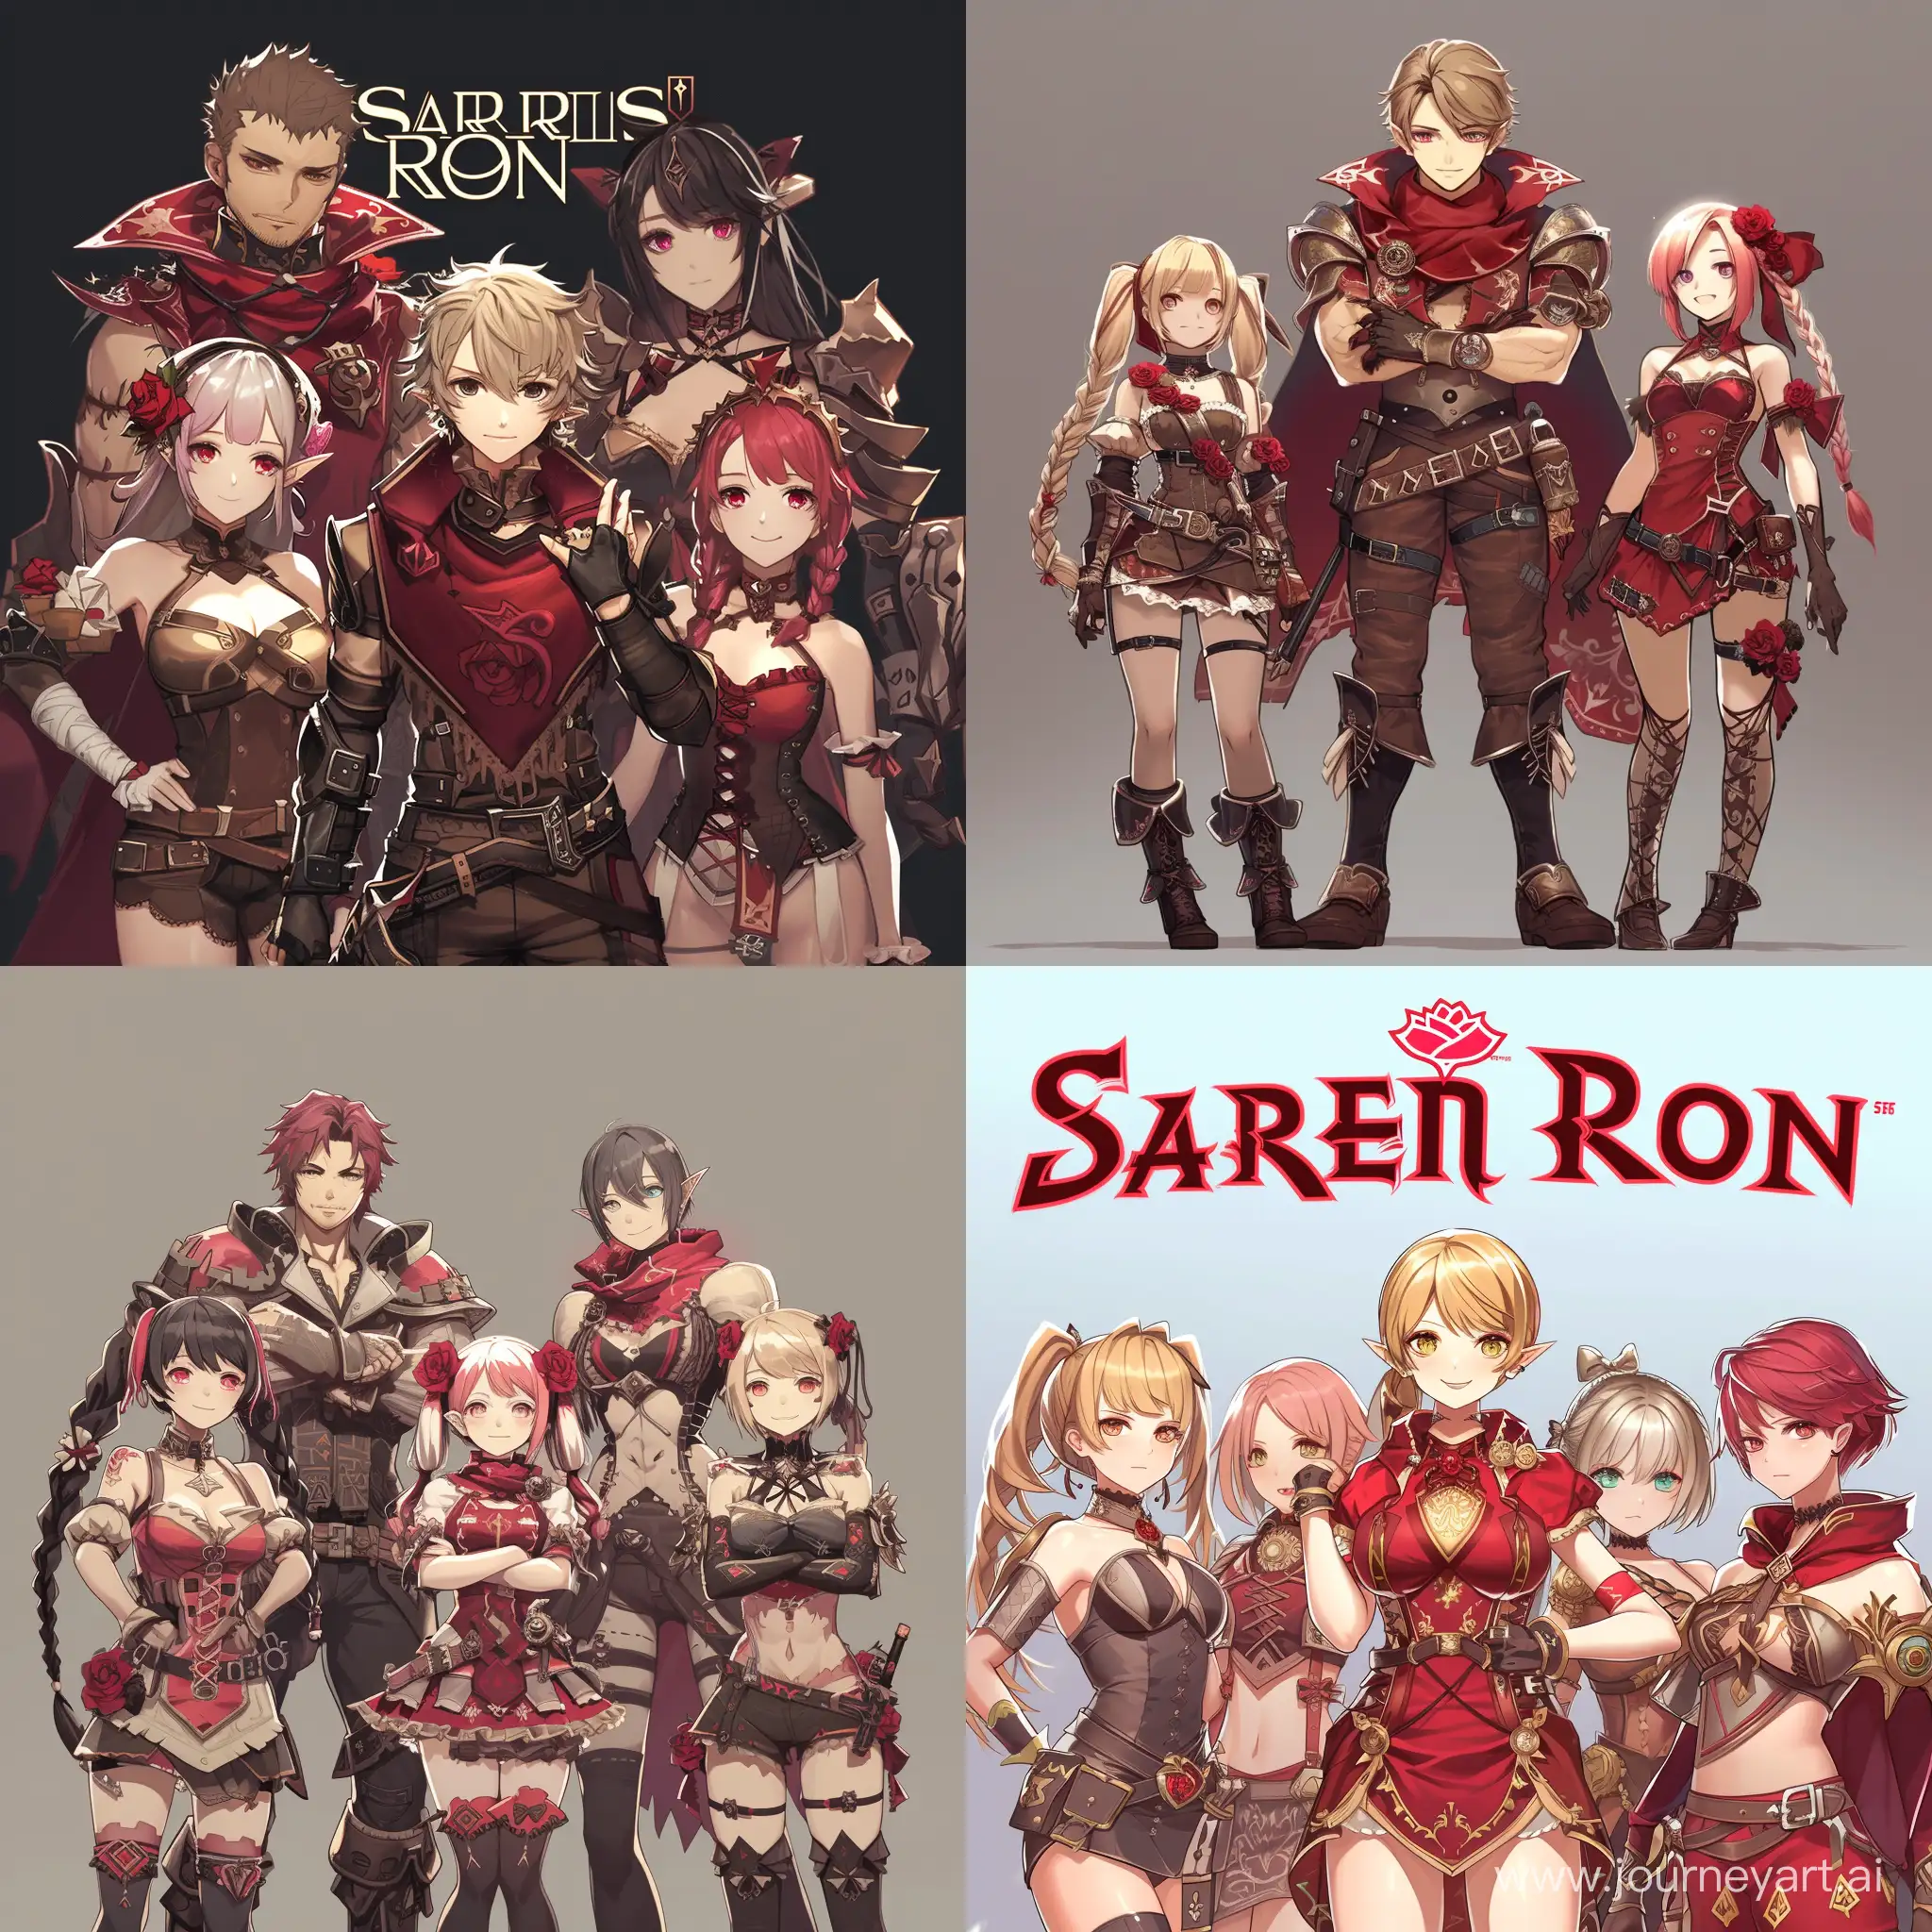 Vibrant-Portrait-of-the-Scarlet-Rose-Guilds-Female-Members-with-Their-Male-Leaders